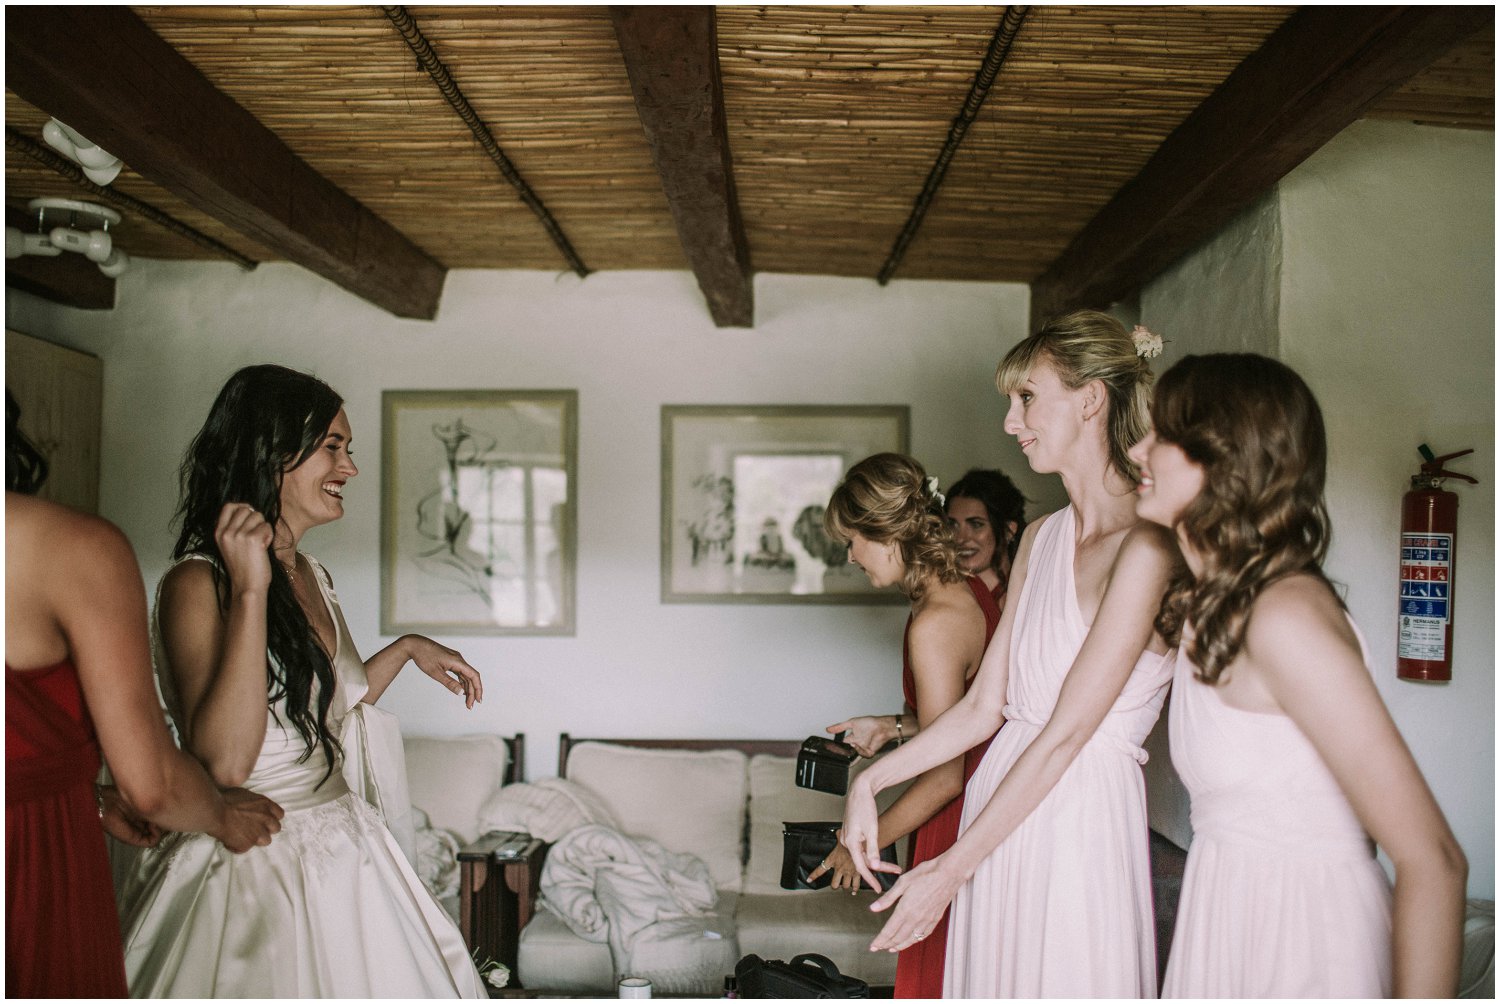 Top Wedding Photographer Cape Town South Africa Artistic Creative Documentary Wedding Photography Rue Kruger_0830.jpg